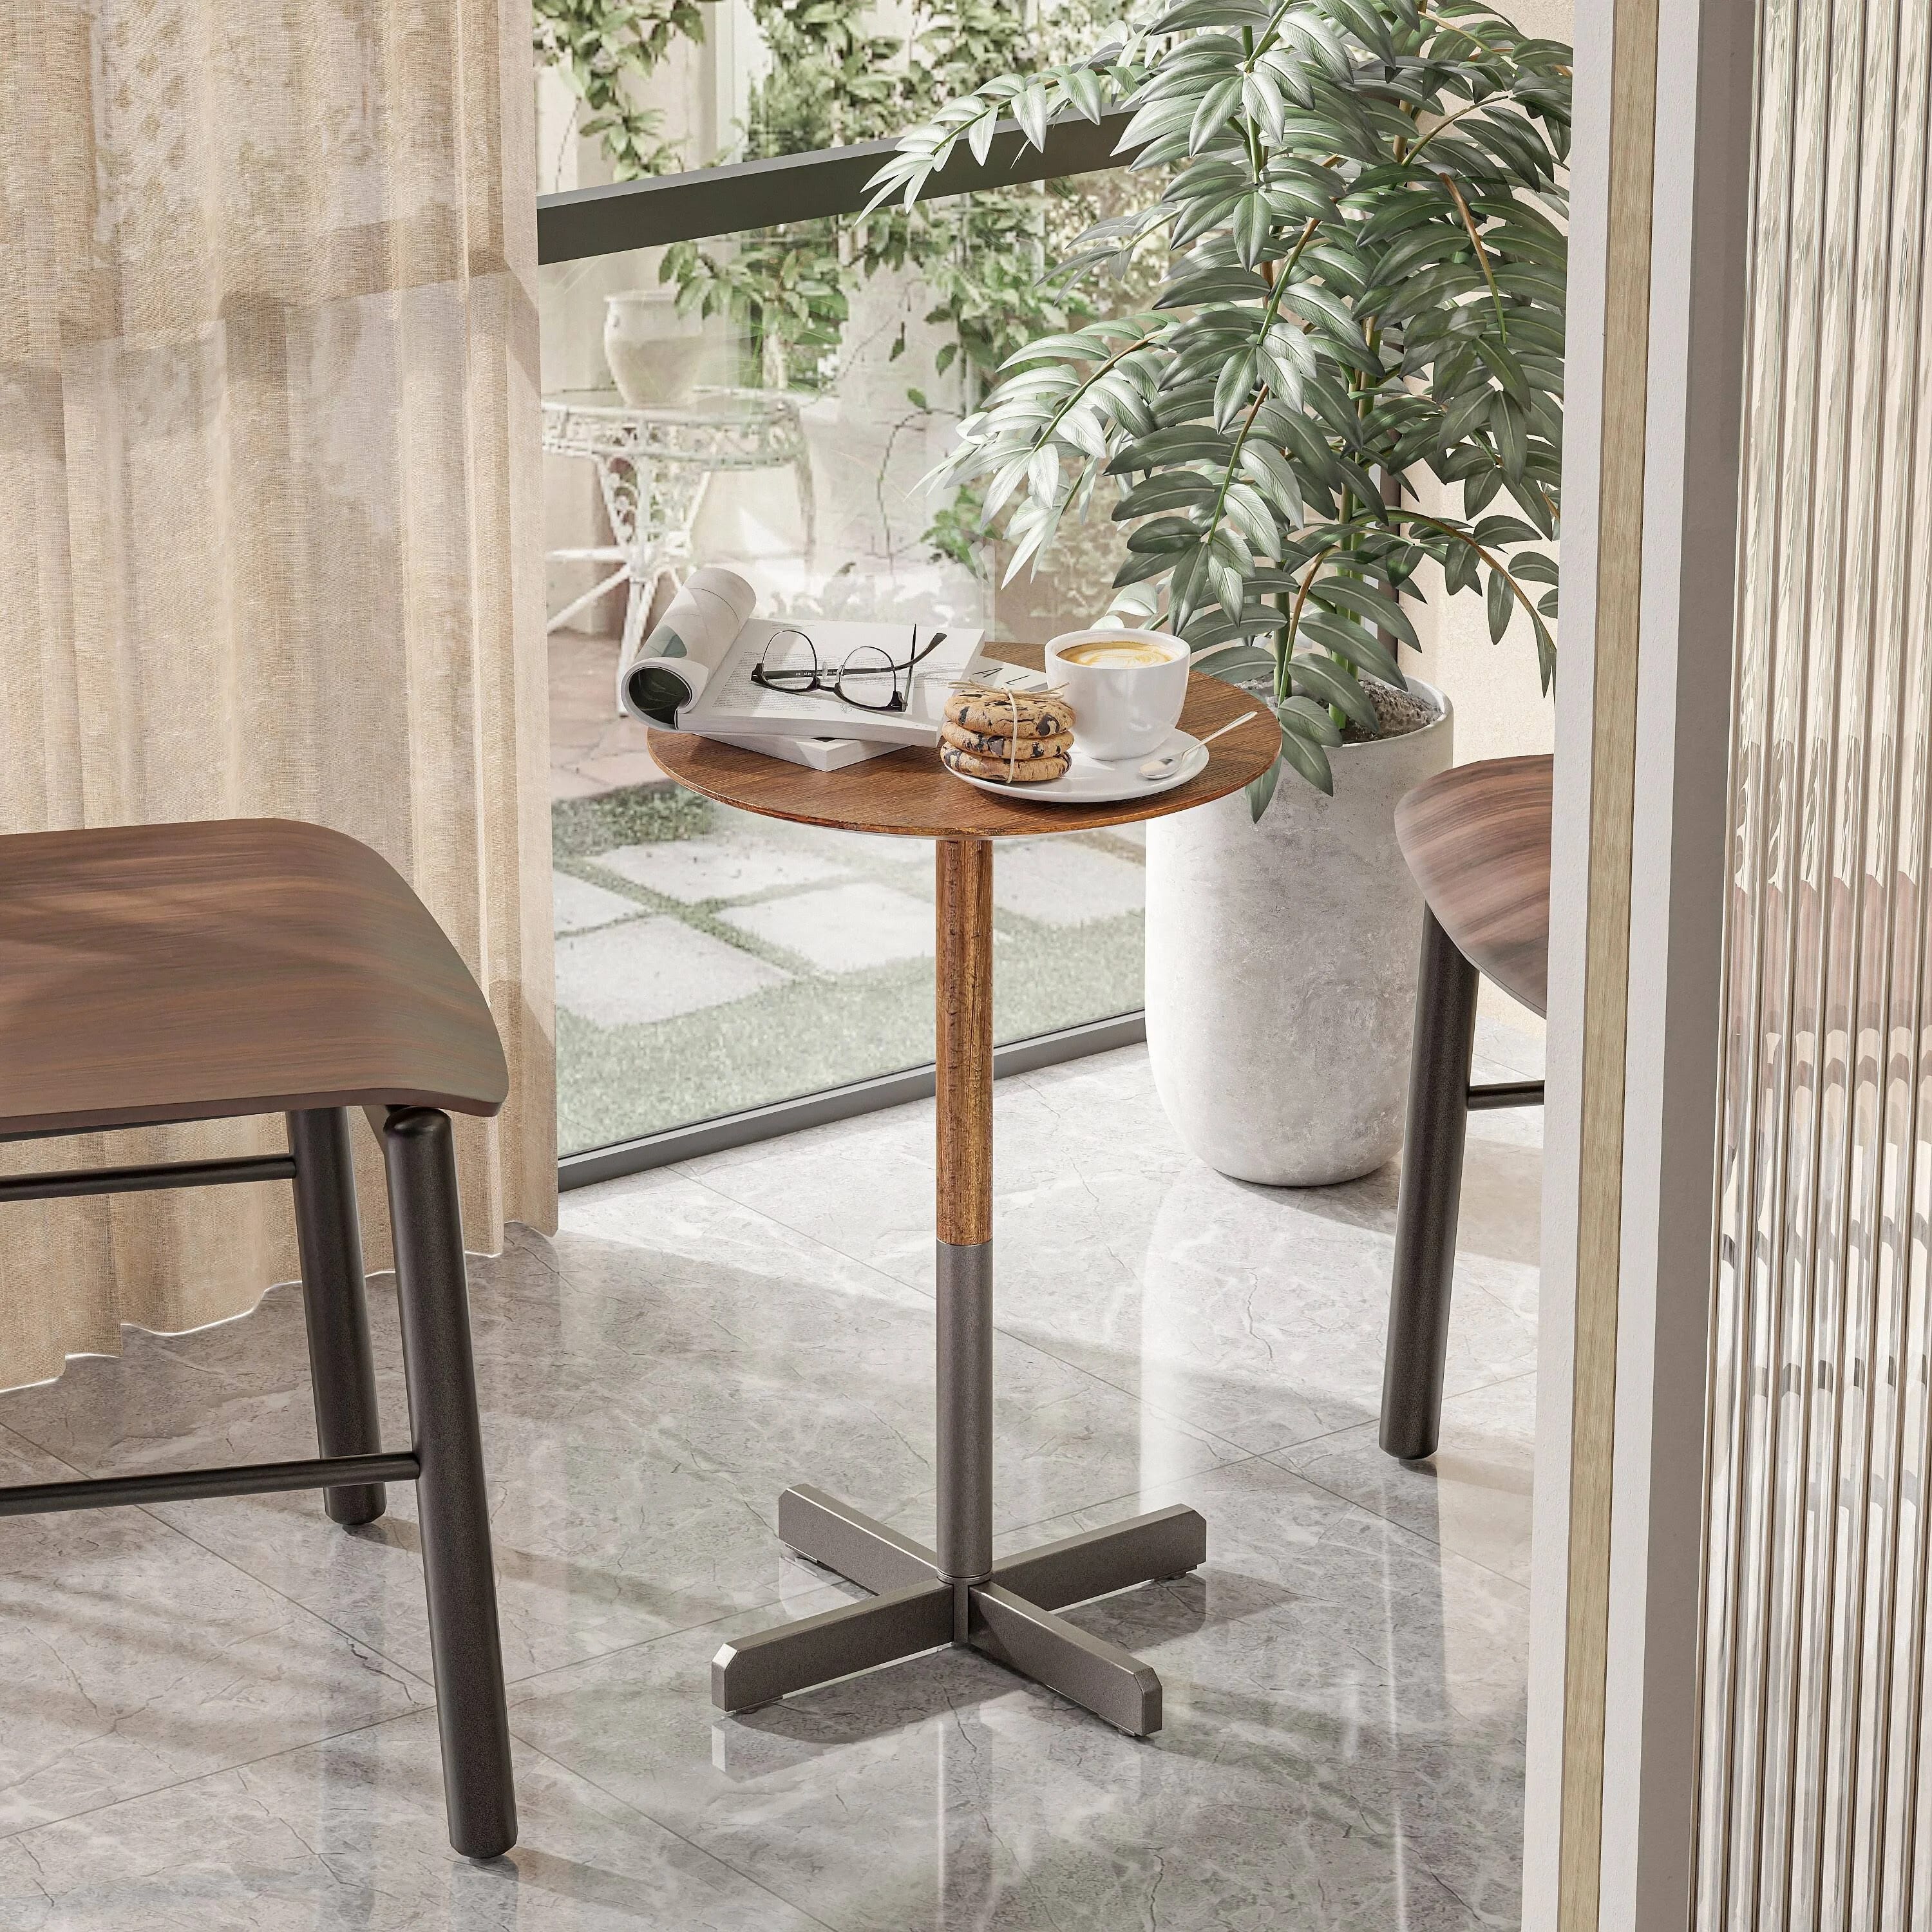 Stylish Small Pedestal Drink Table | Image